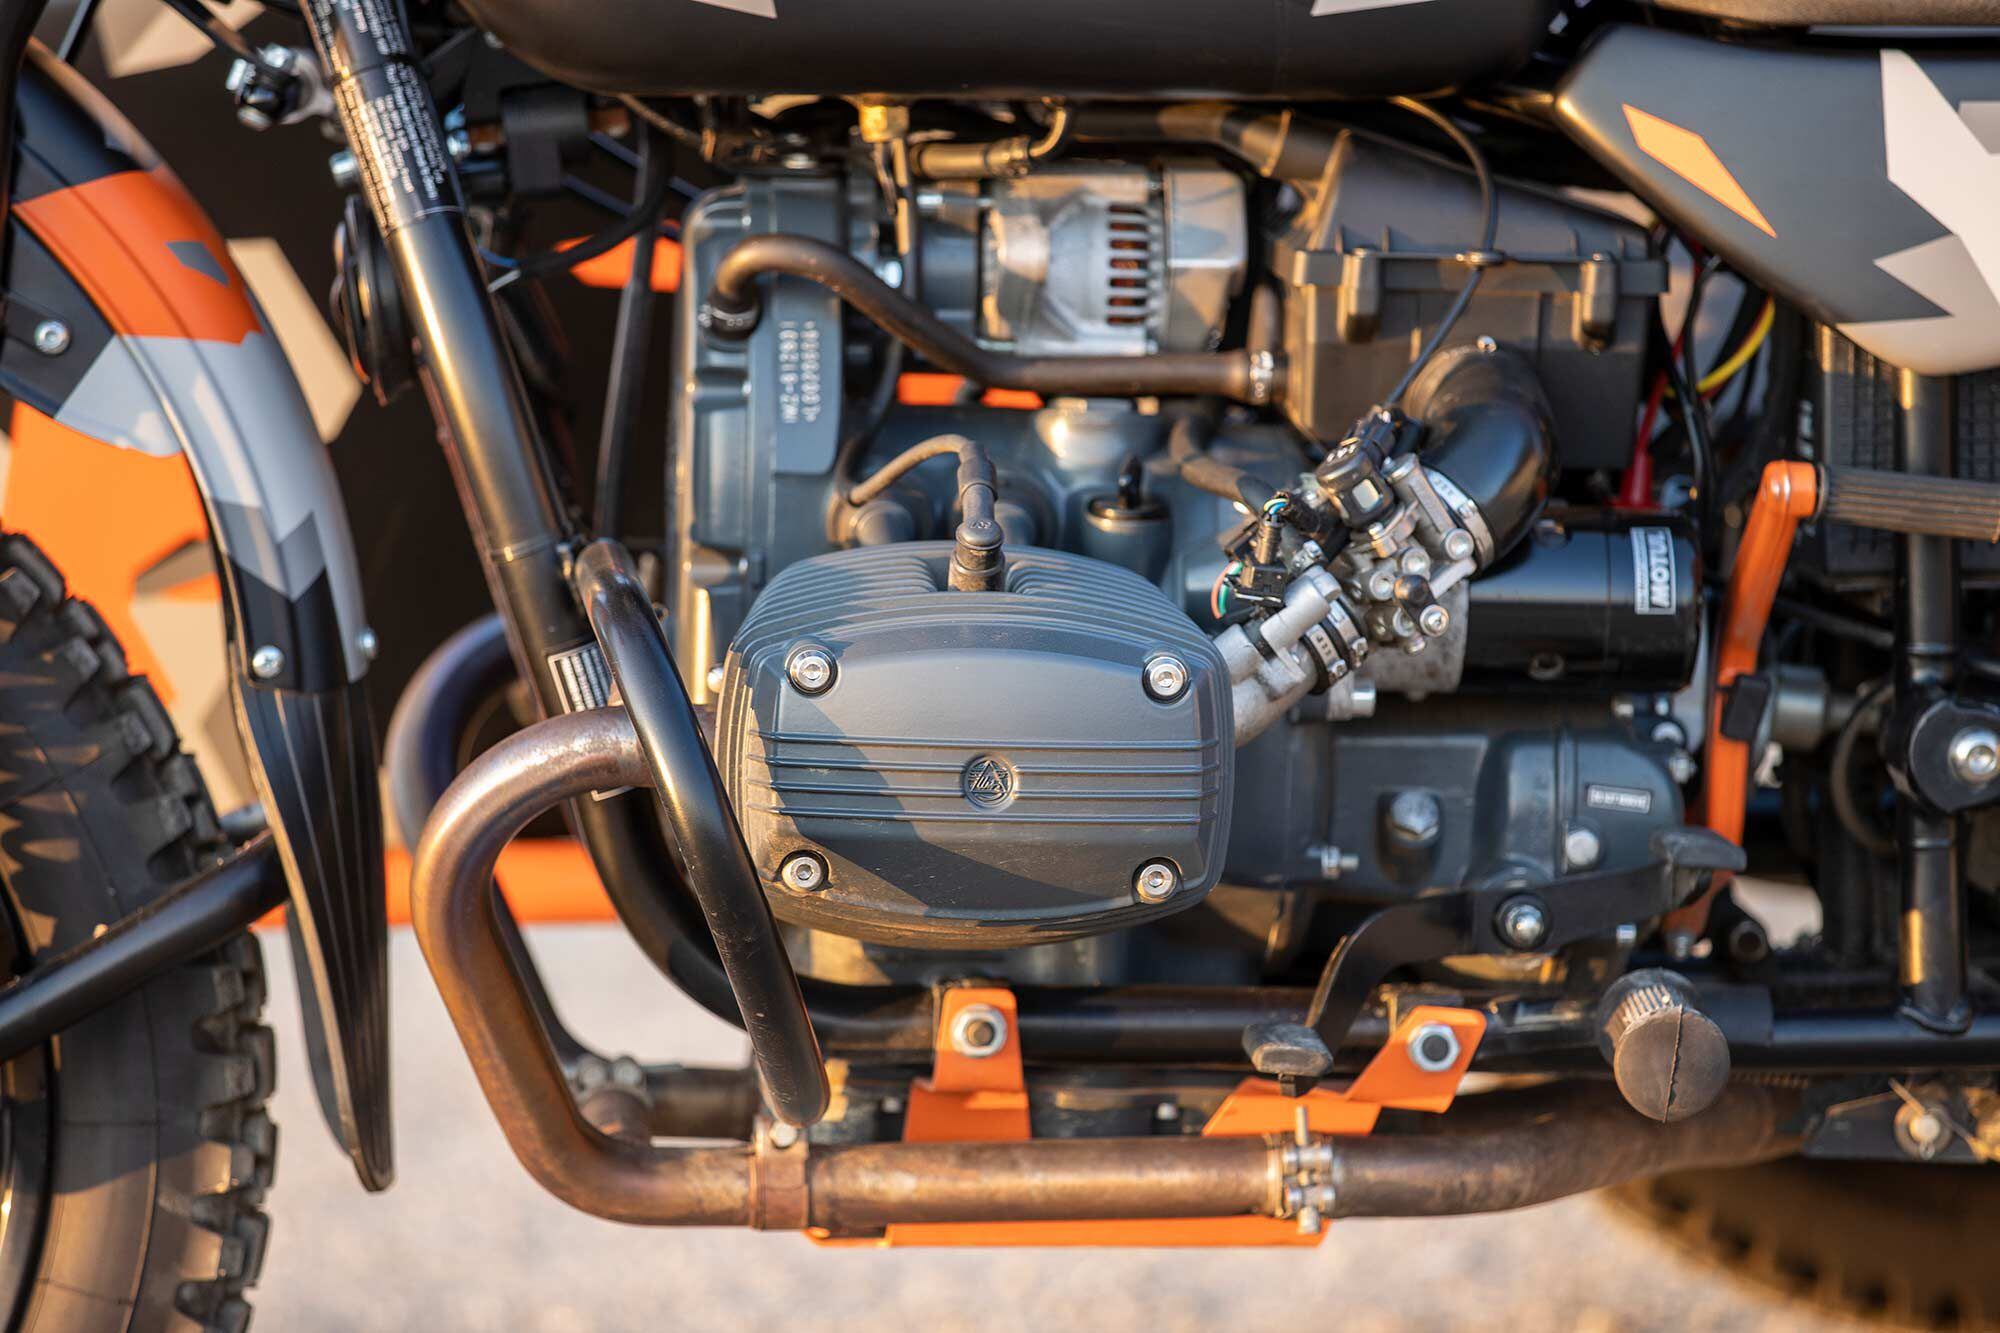 A 749cc boxer gives the Ural Gear Up Geo a vintage feel, mostly in the right way.